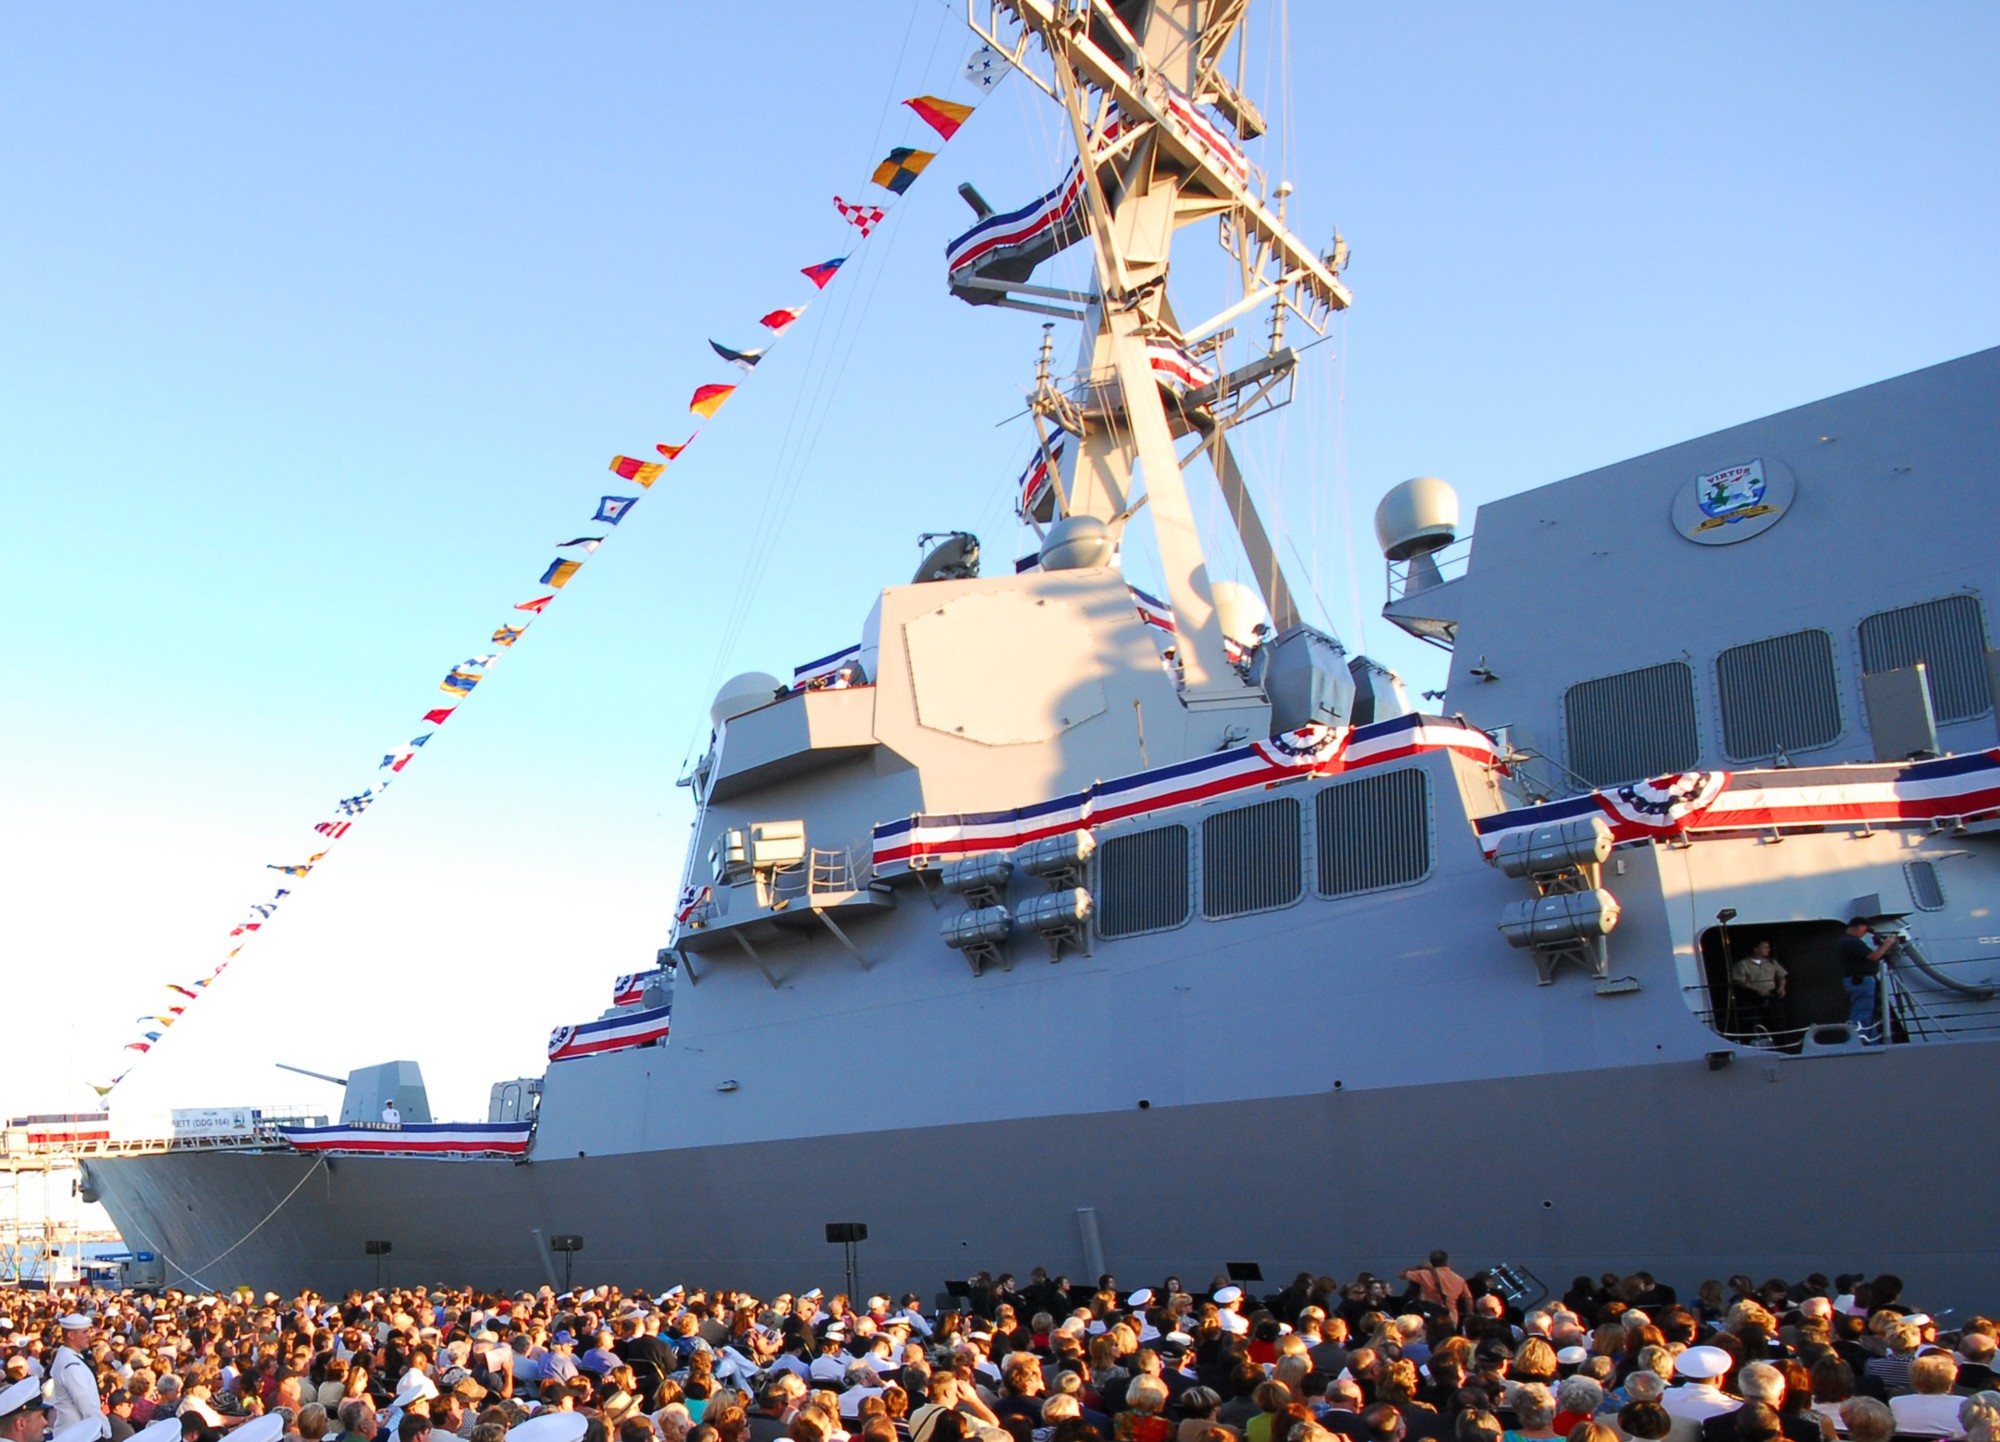 ddg-104 uss sterett arleigh burke class guided missile destroyer aegis us navy commissioning ceremony baltimore maryland 2008 39